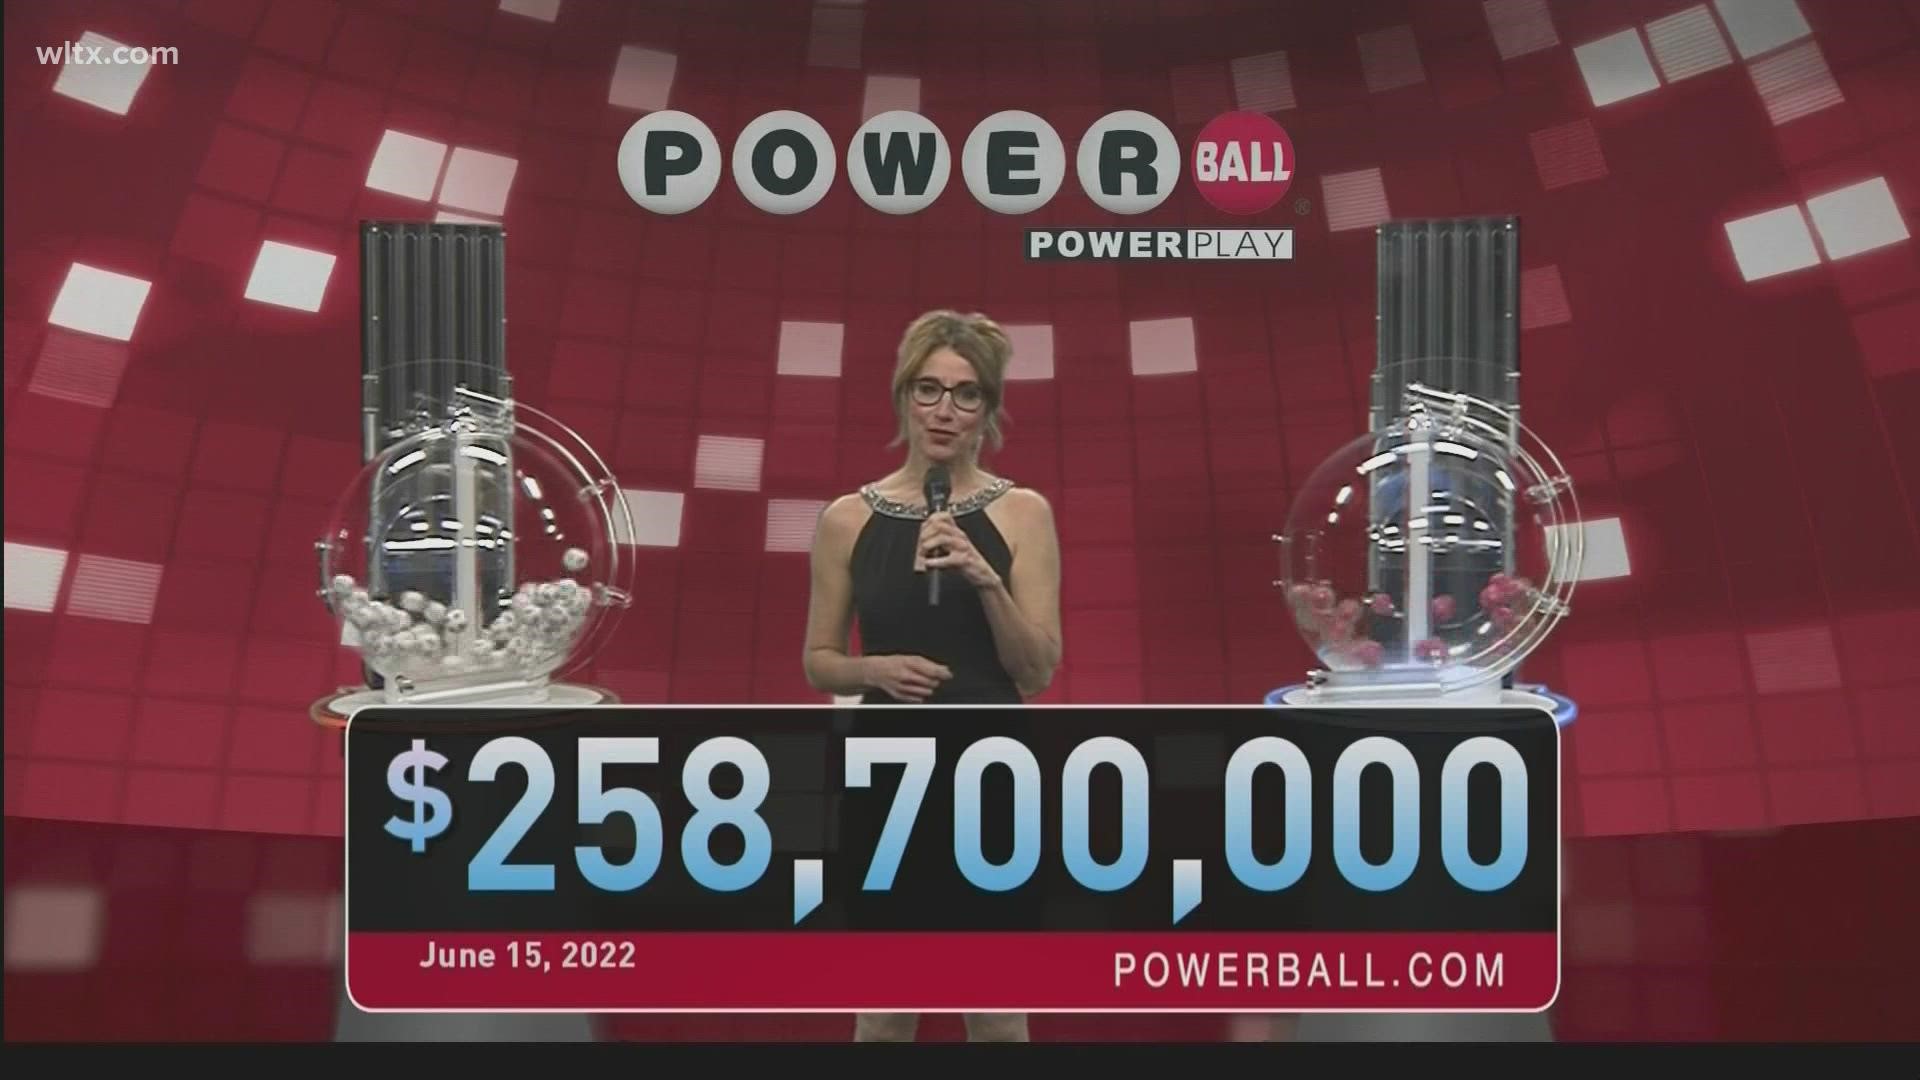 Here are the winning Powerball numbers for Wednesday, June 15, 2022.